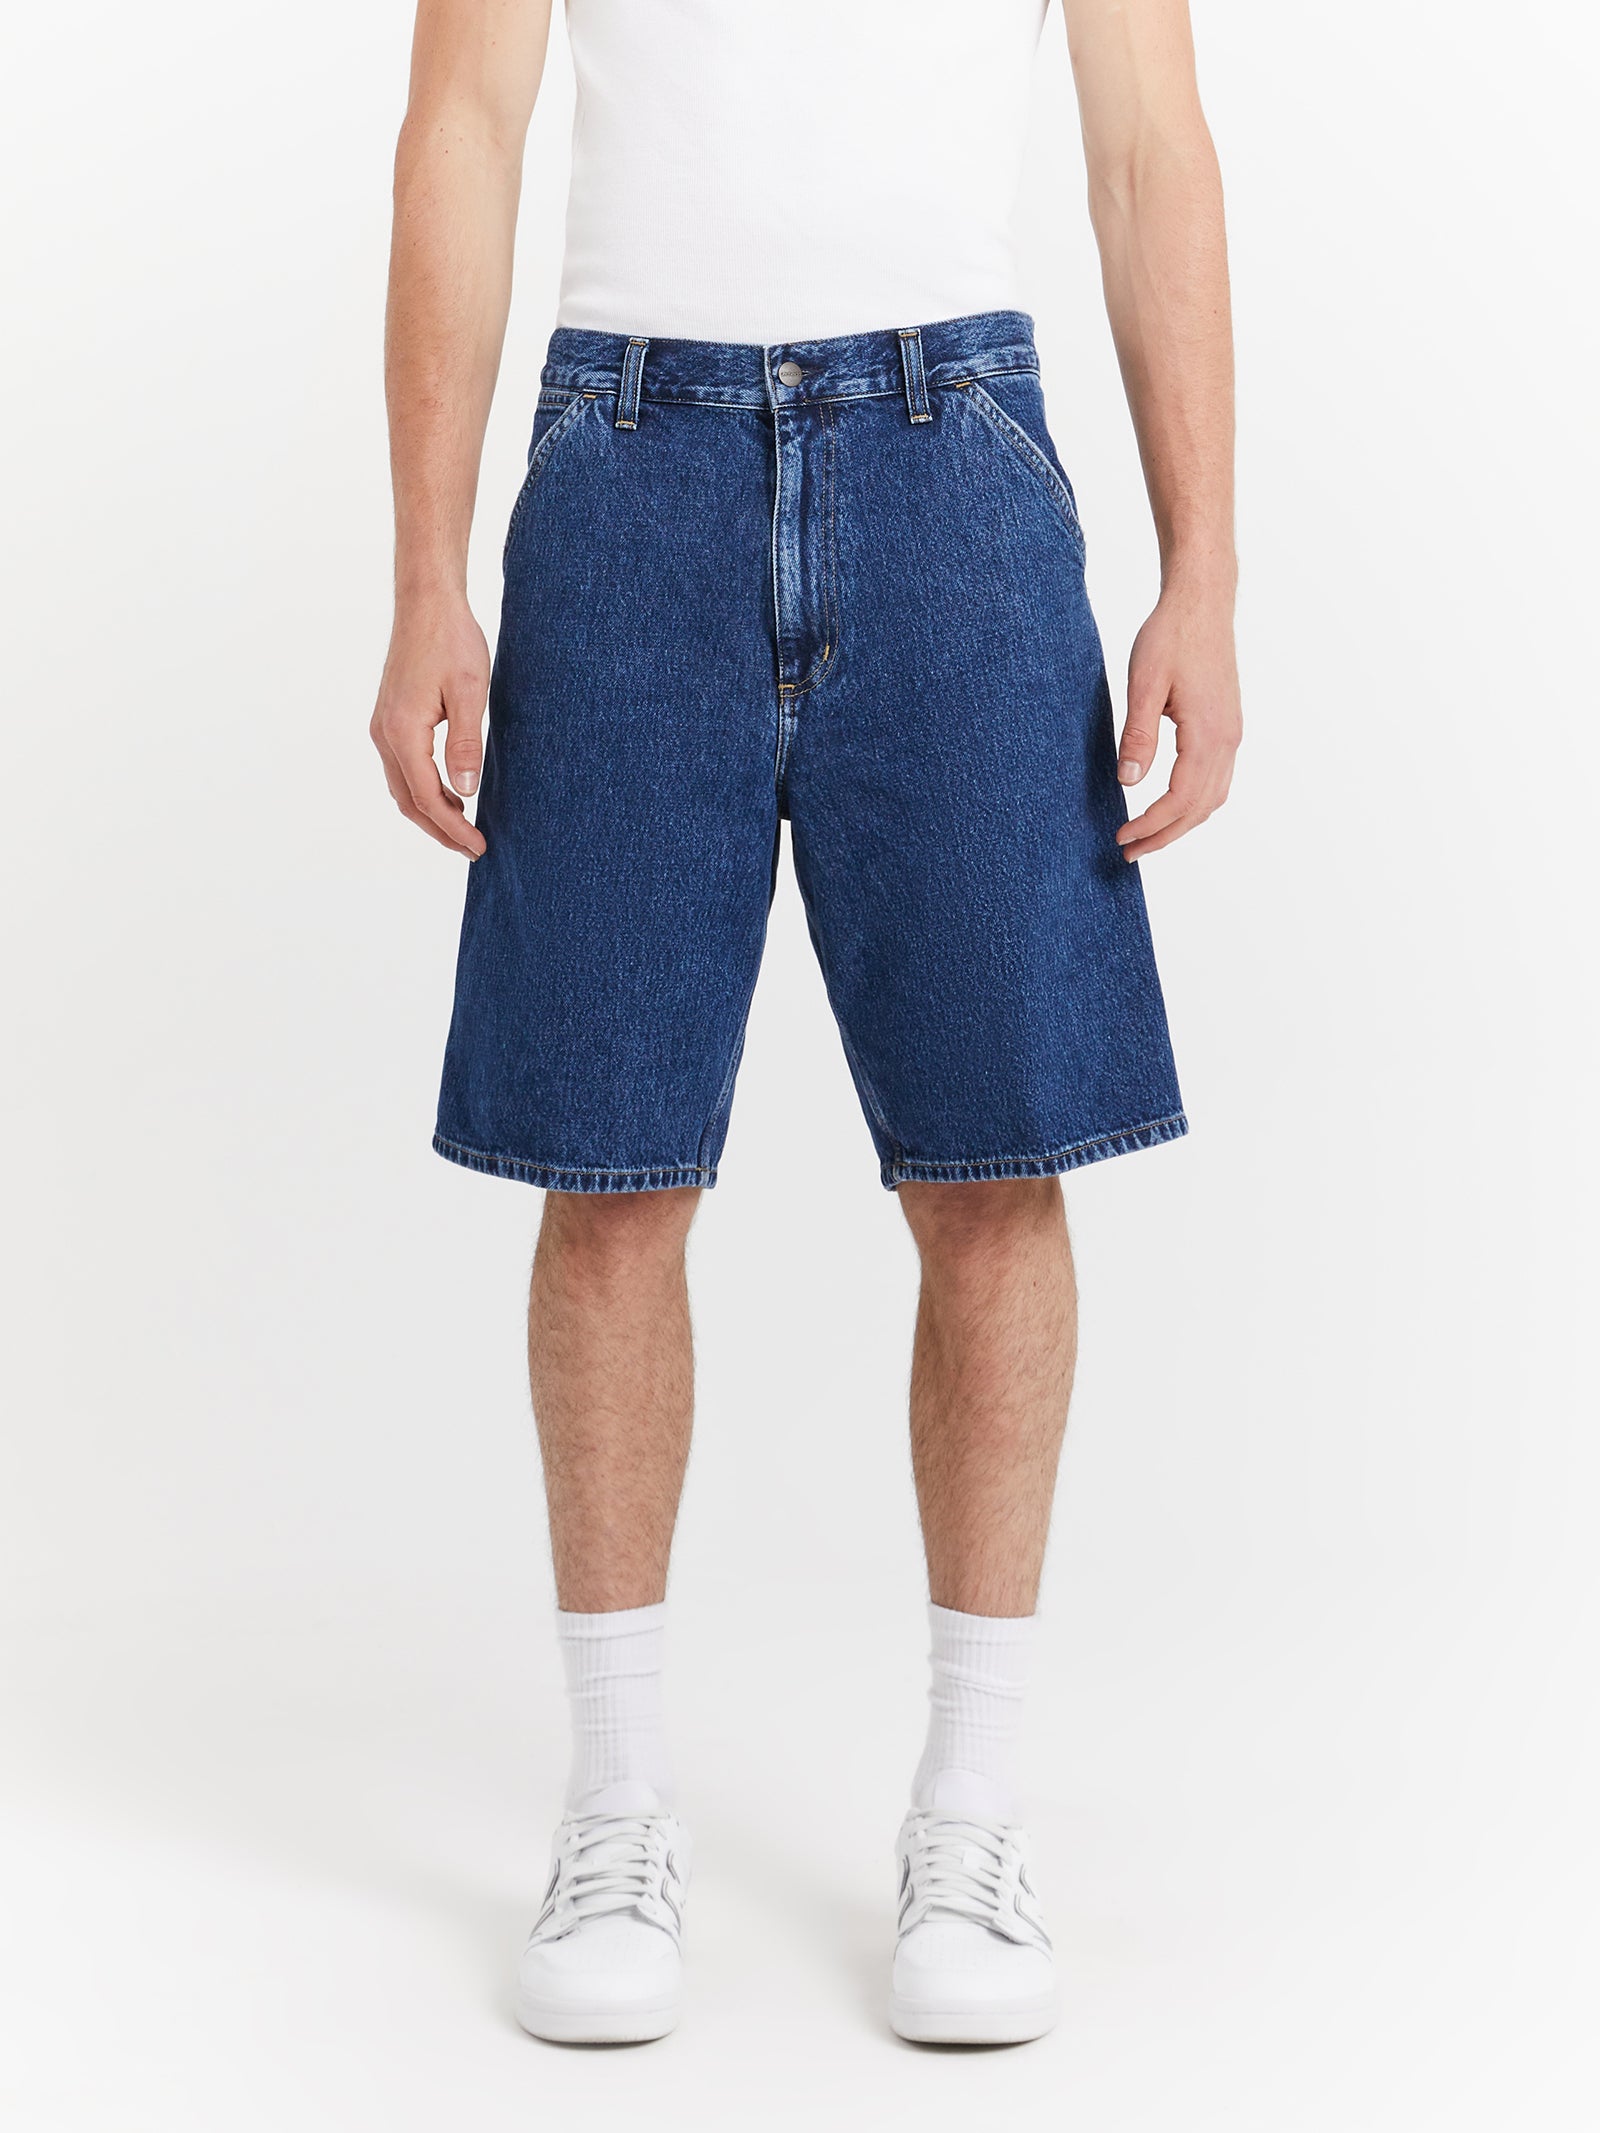 Single Knee Shorts in Blue Stone Washed - Glue Store